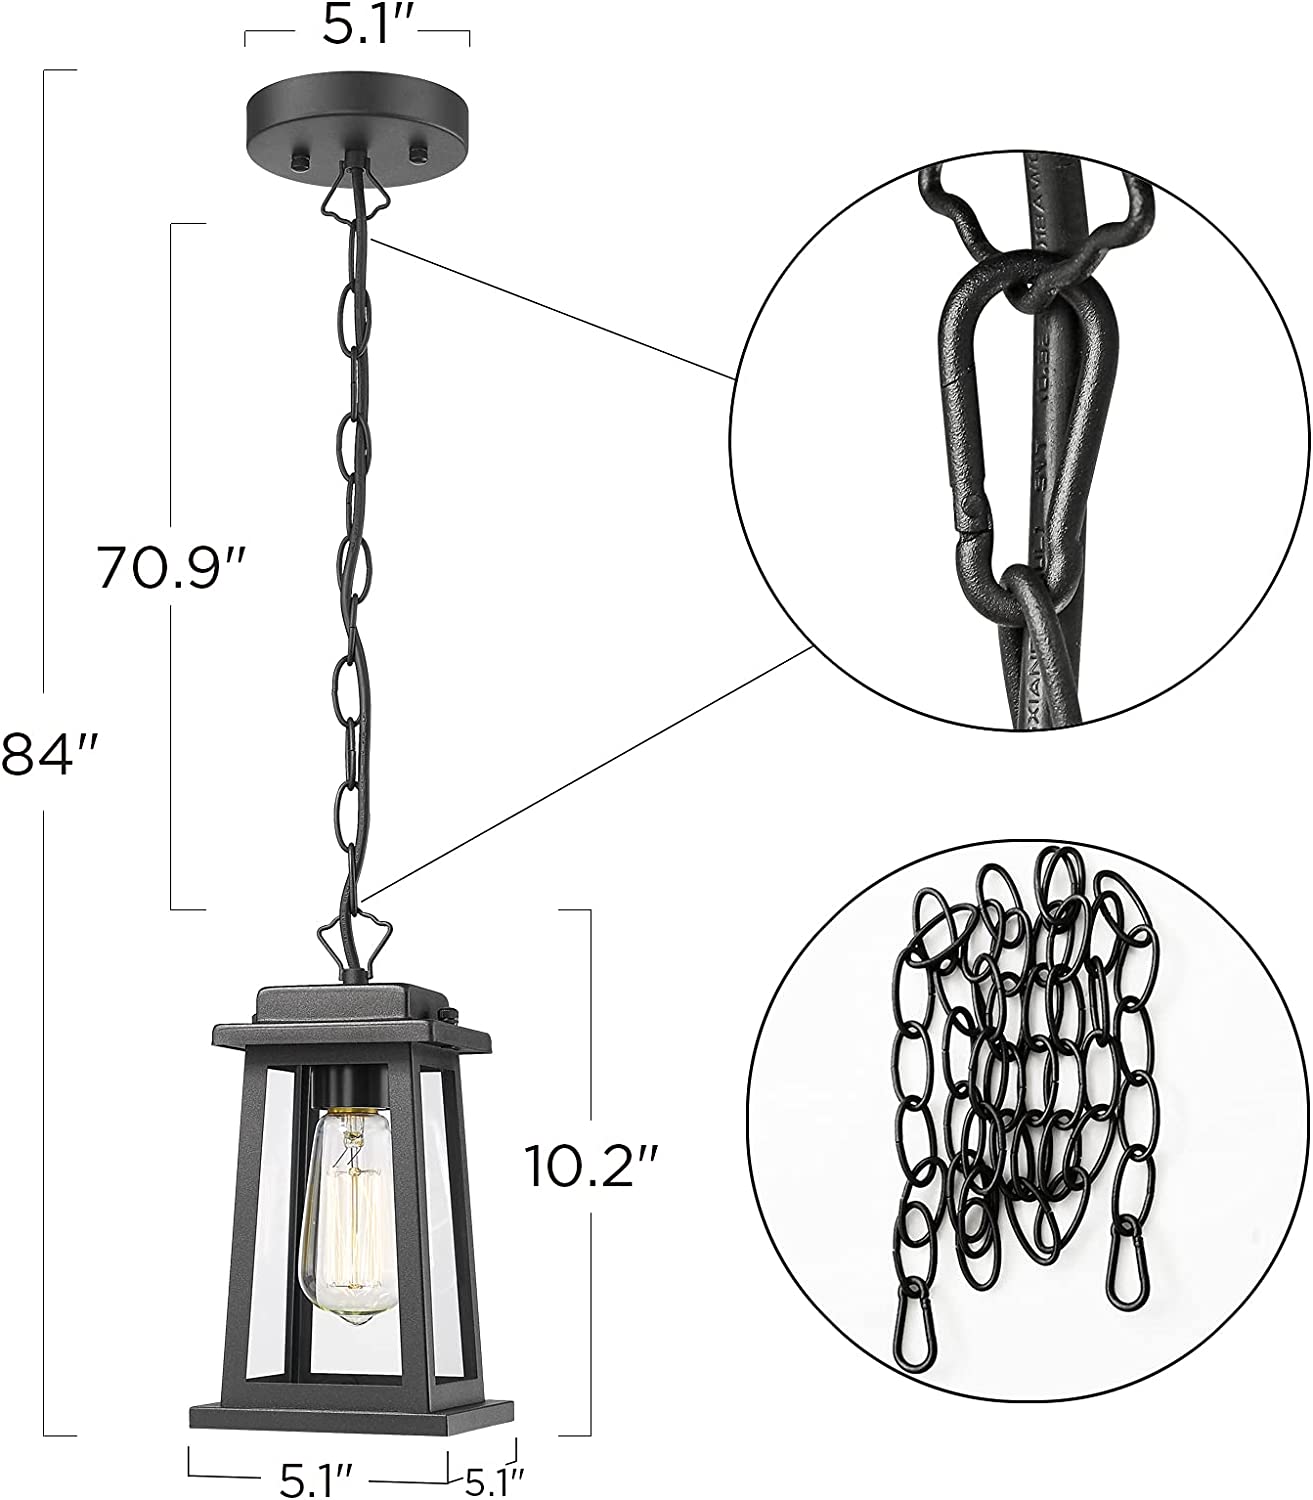 Outdoor hanging lantern black exterior pendant lamp with glass shade